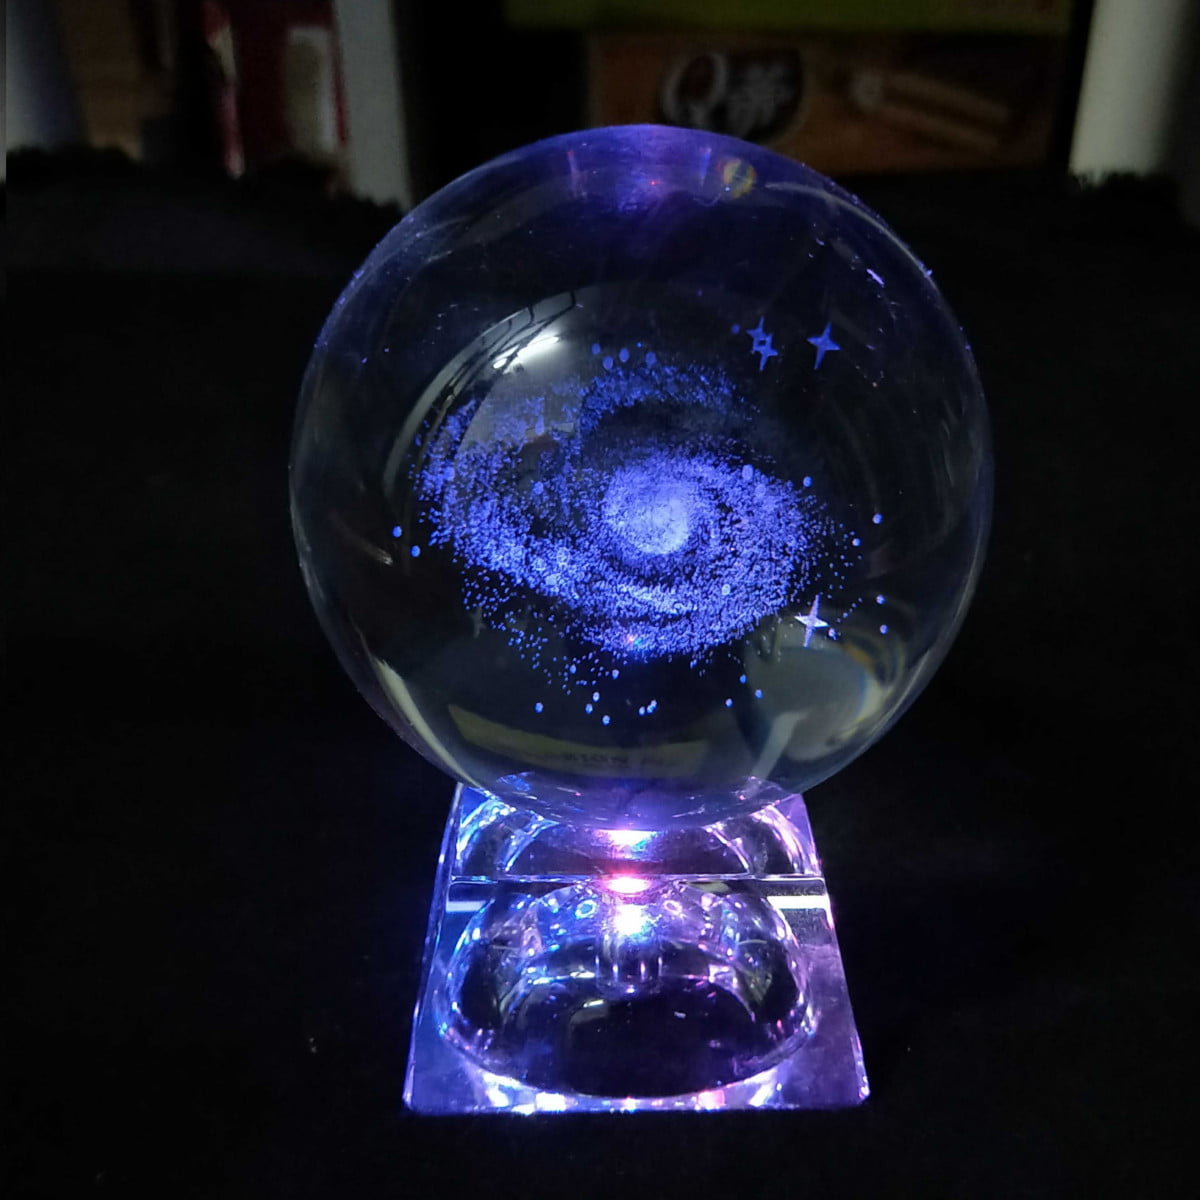 Galaxy Balls for Kids with LED Lamp Base Zulux Galaxy Crystal Ball 3 inch Clear 80mm Teacher Gifts,Gift for Anniversary and Boyfriend Birthday Galaxy Glass Art for Kids Birthday Gifts 